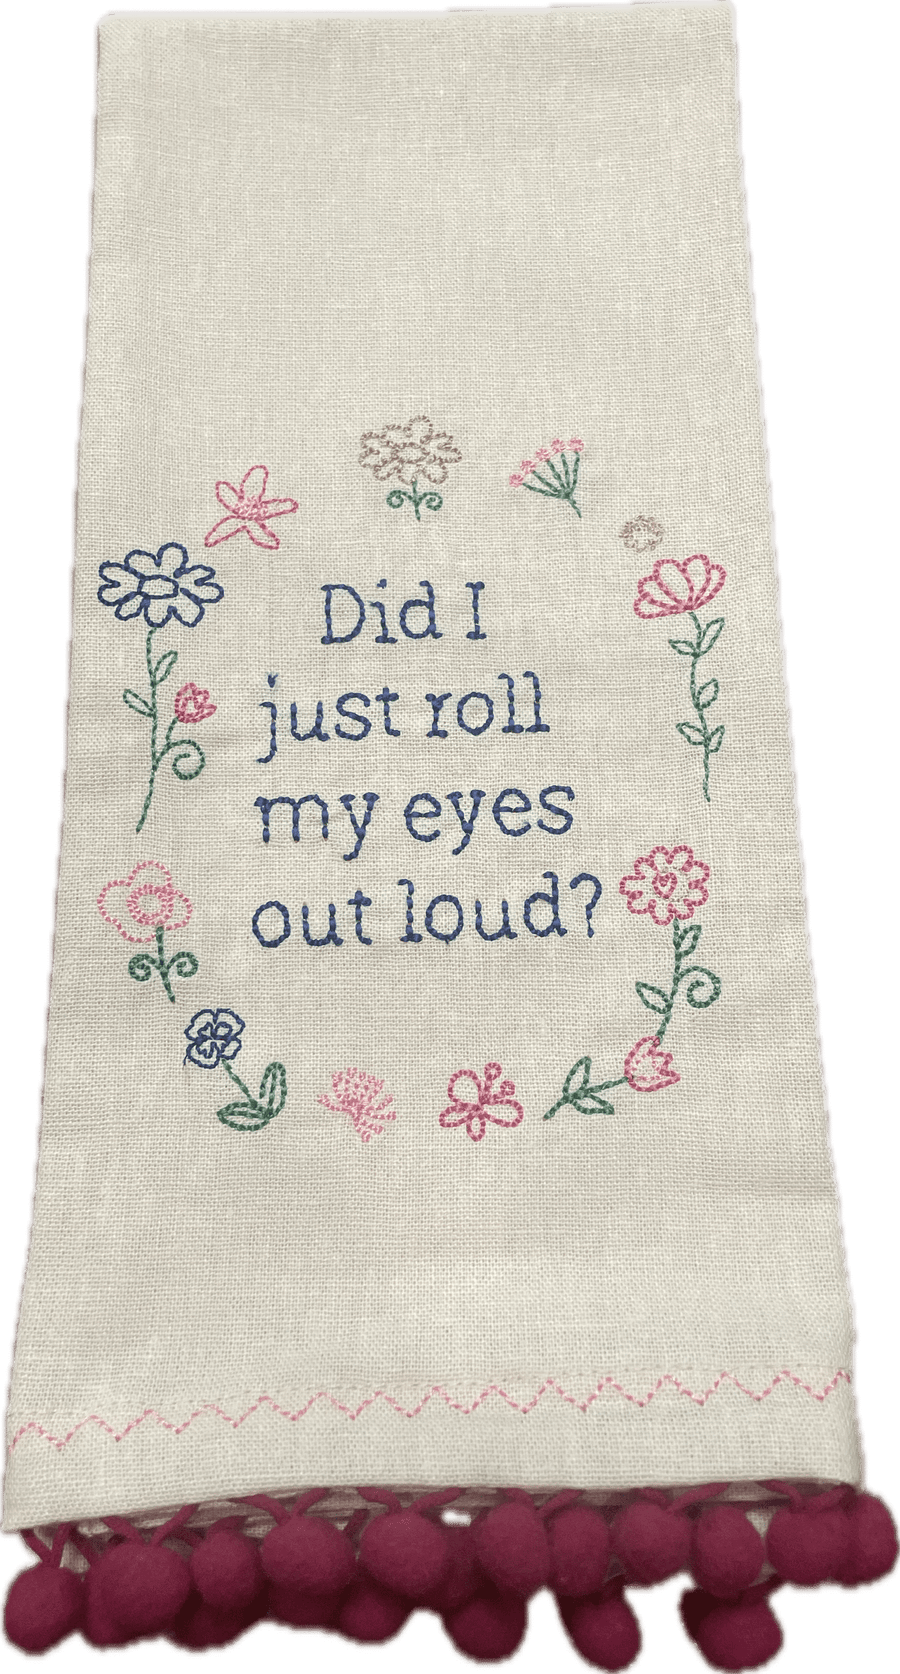 Needle Point Linen Tea Towels - Did I Just Roll my Eyes Out Loud?